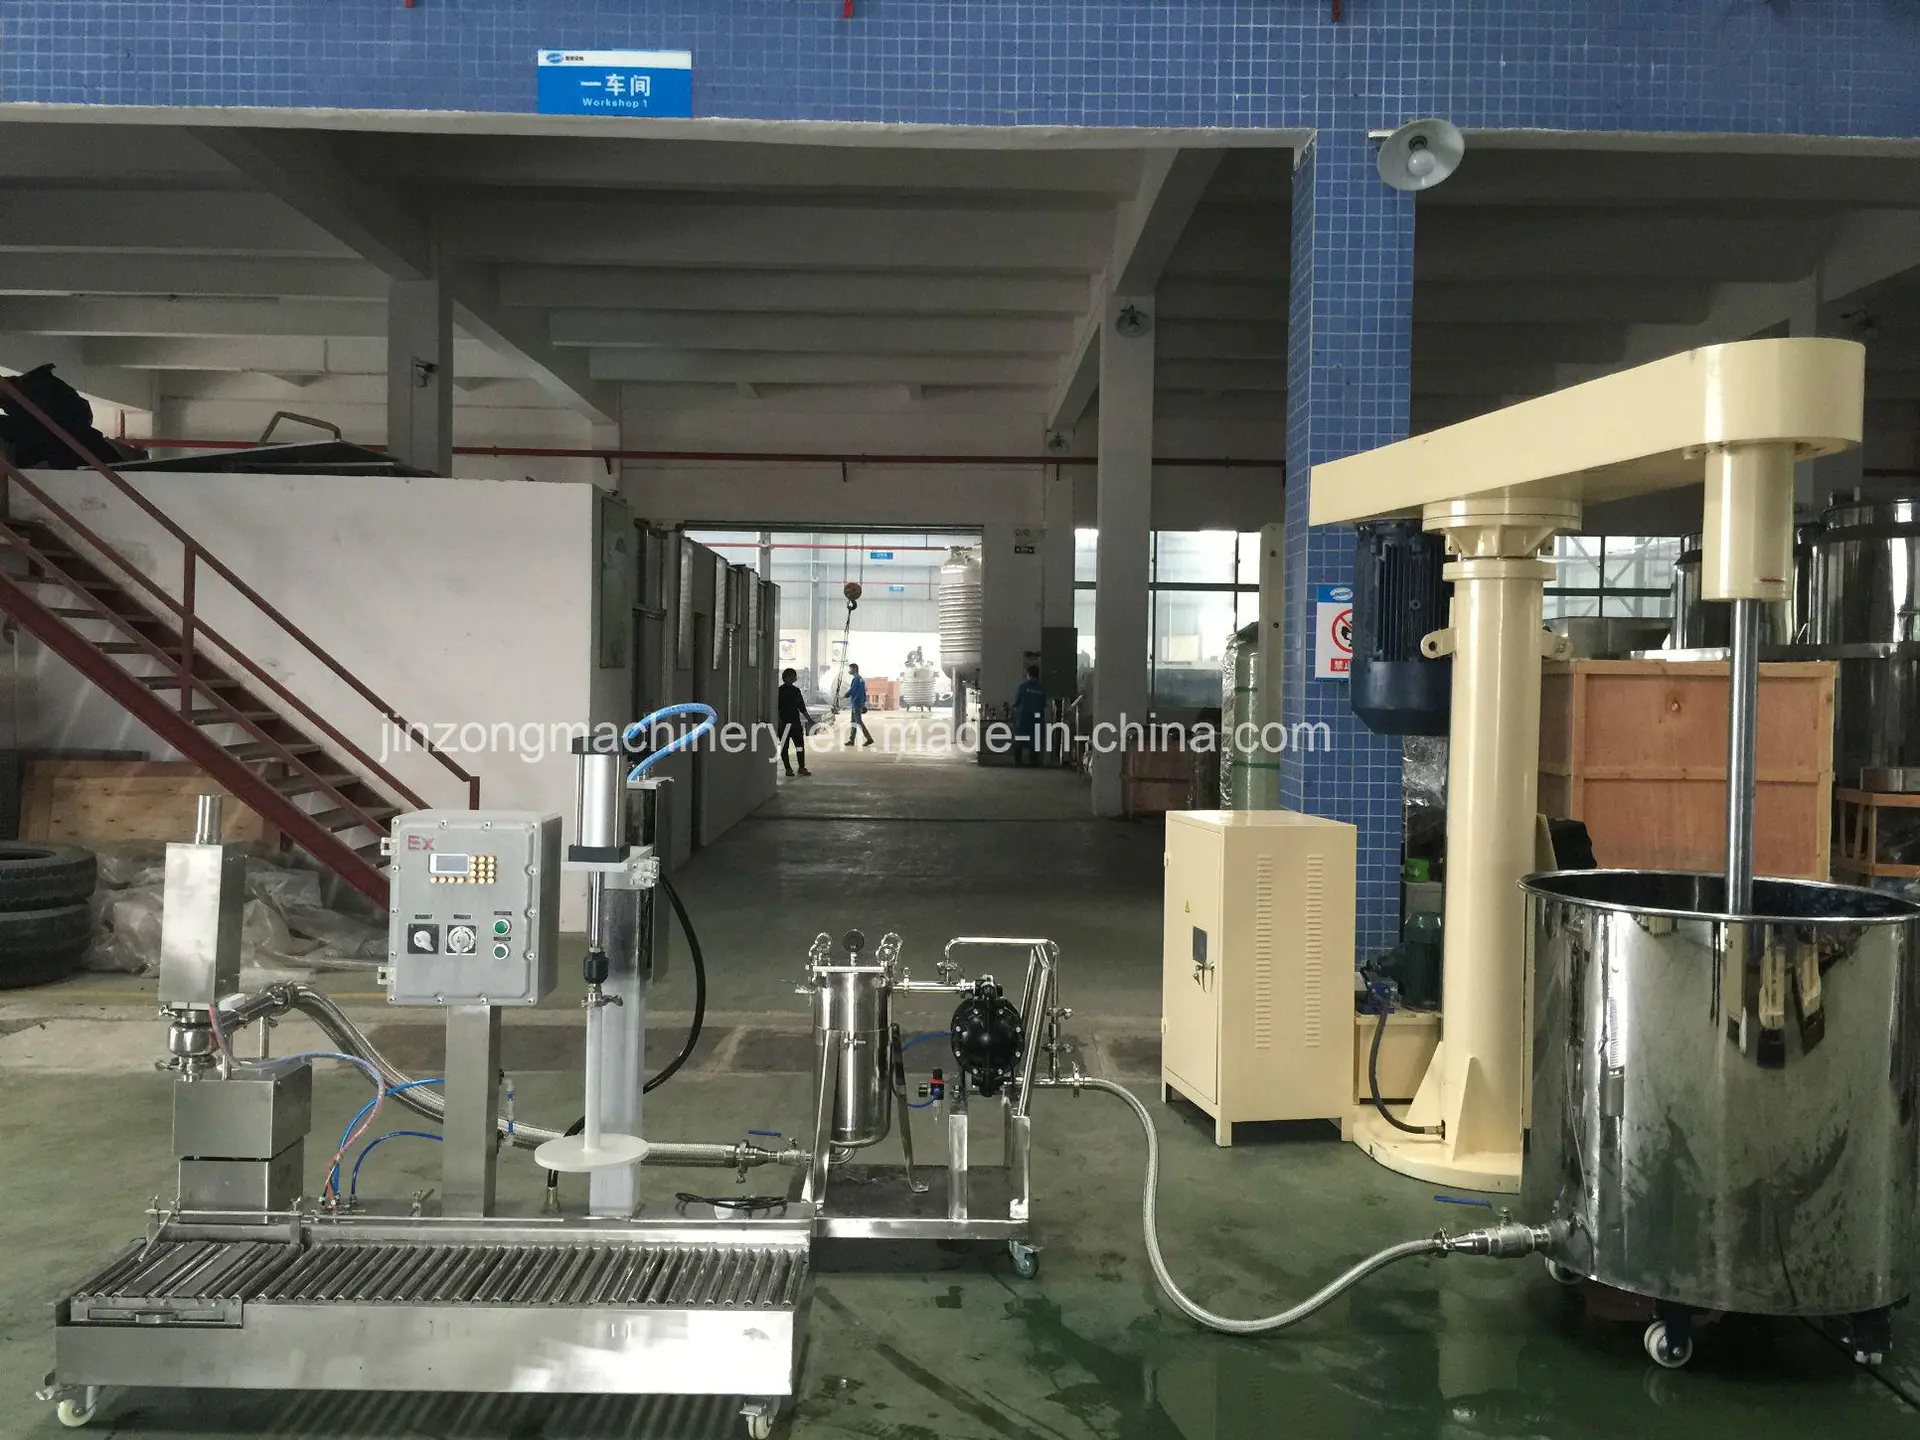 2.2kw~45kw Hydraulic Lifting High Speed Disperser for Paint Coating Inks